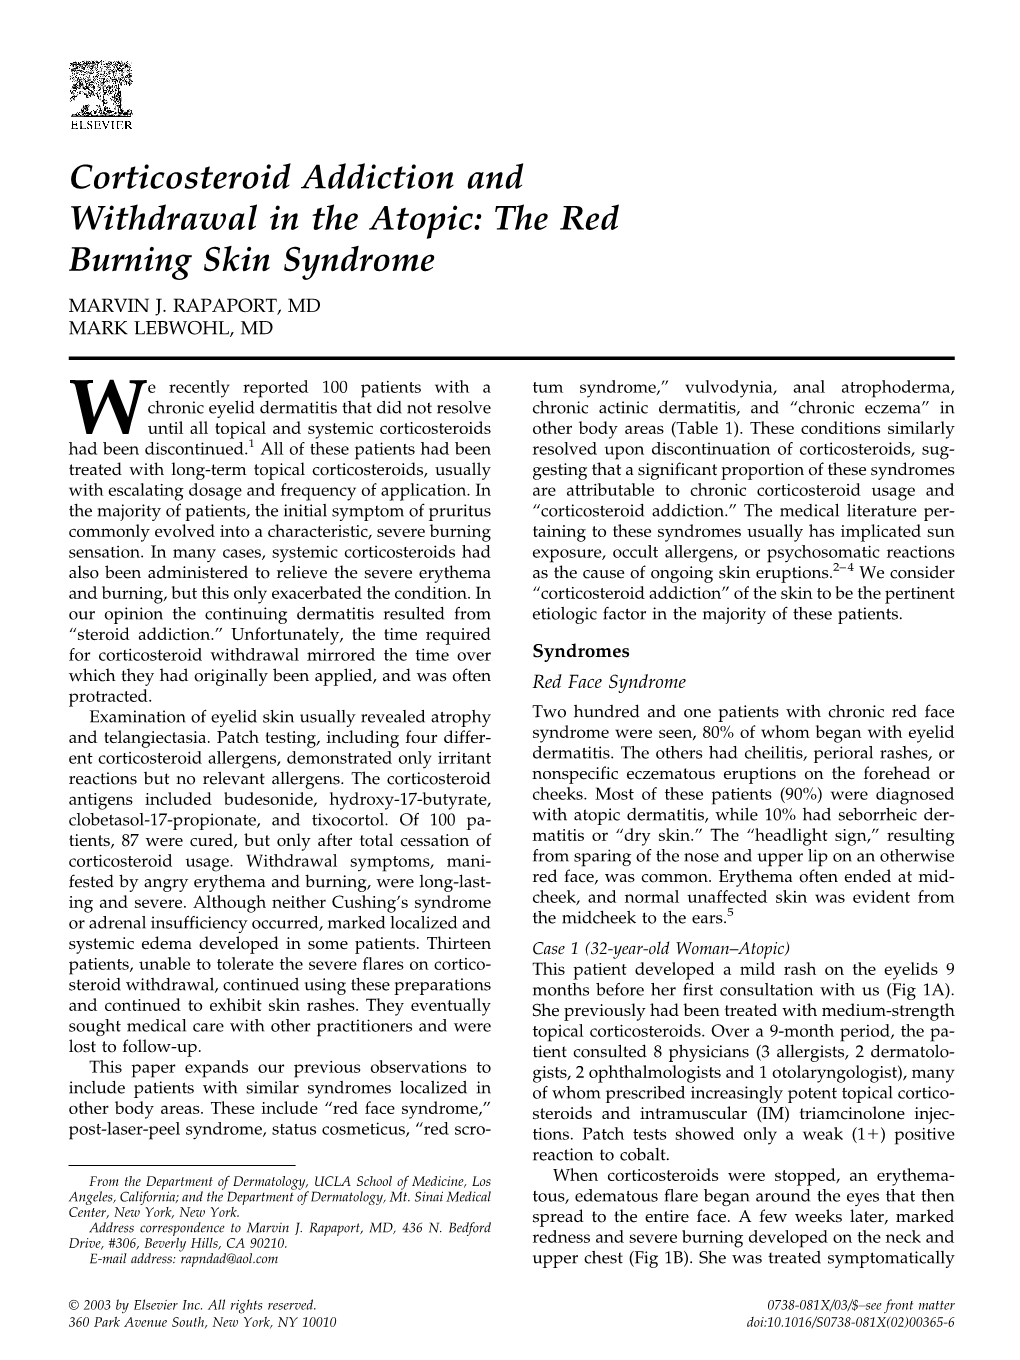 Corticosteroid Addiction and Withdrawal in the Atopic: the Red Burning Skin Syndrome MARVIN J